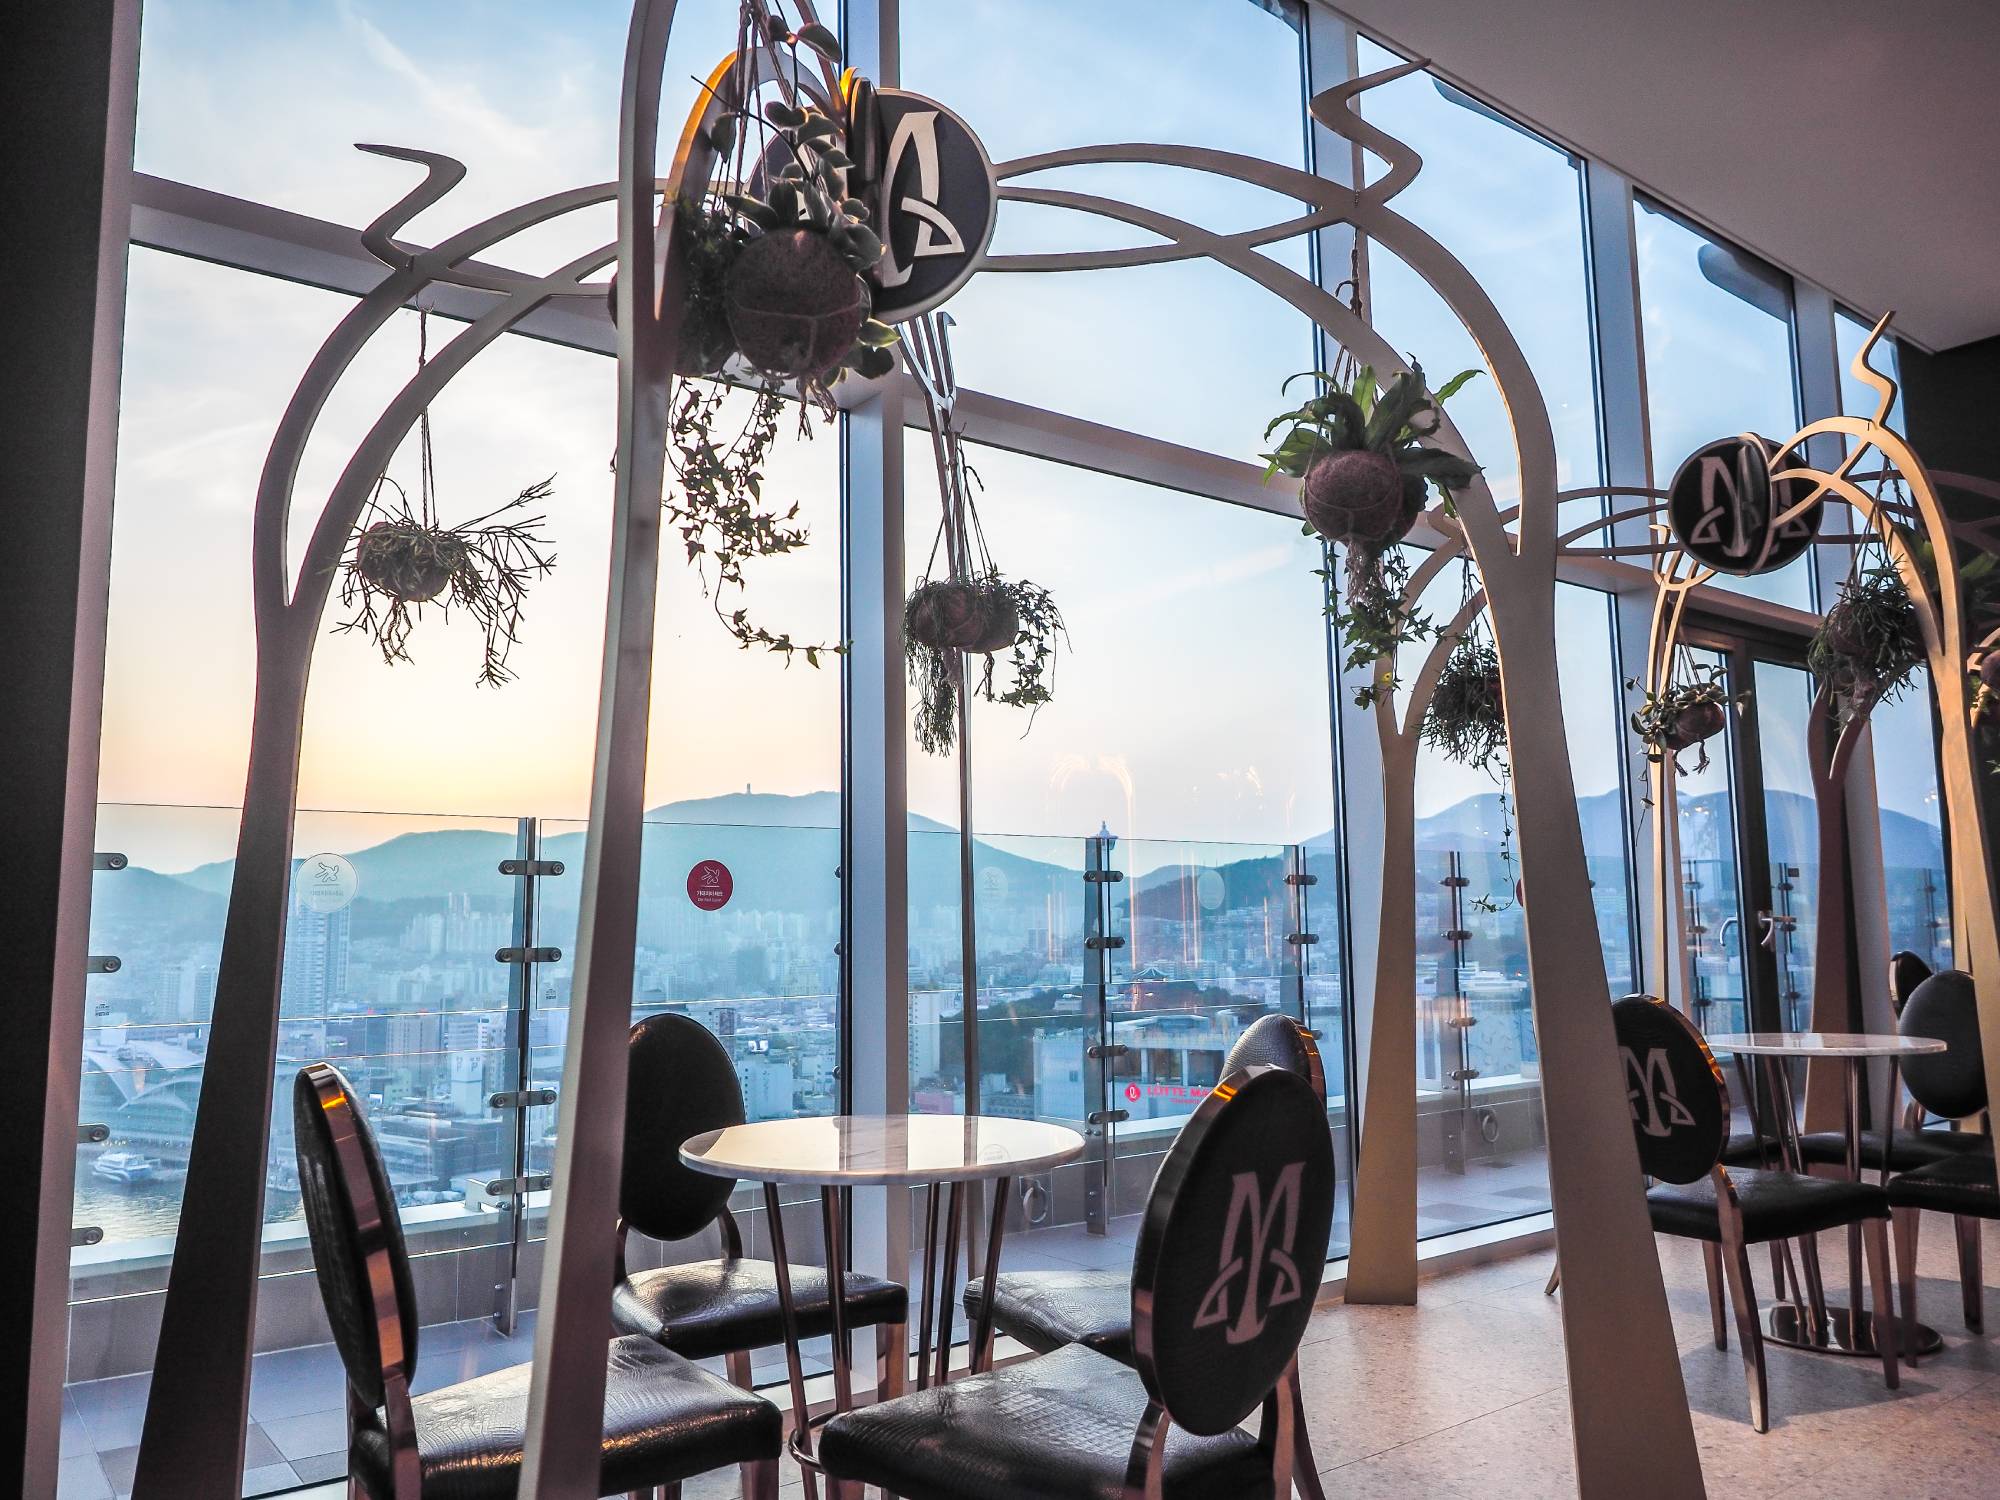 Some prime indoor sunset viewing spots at the 28th floor bar, all unoccupied